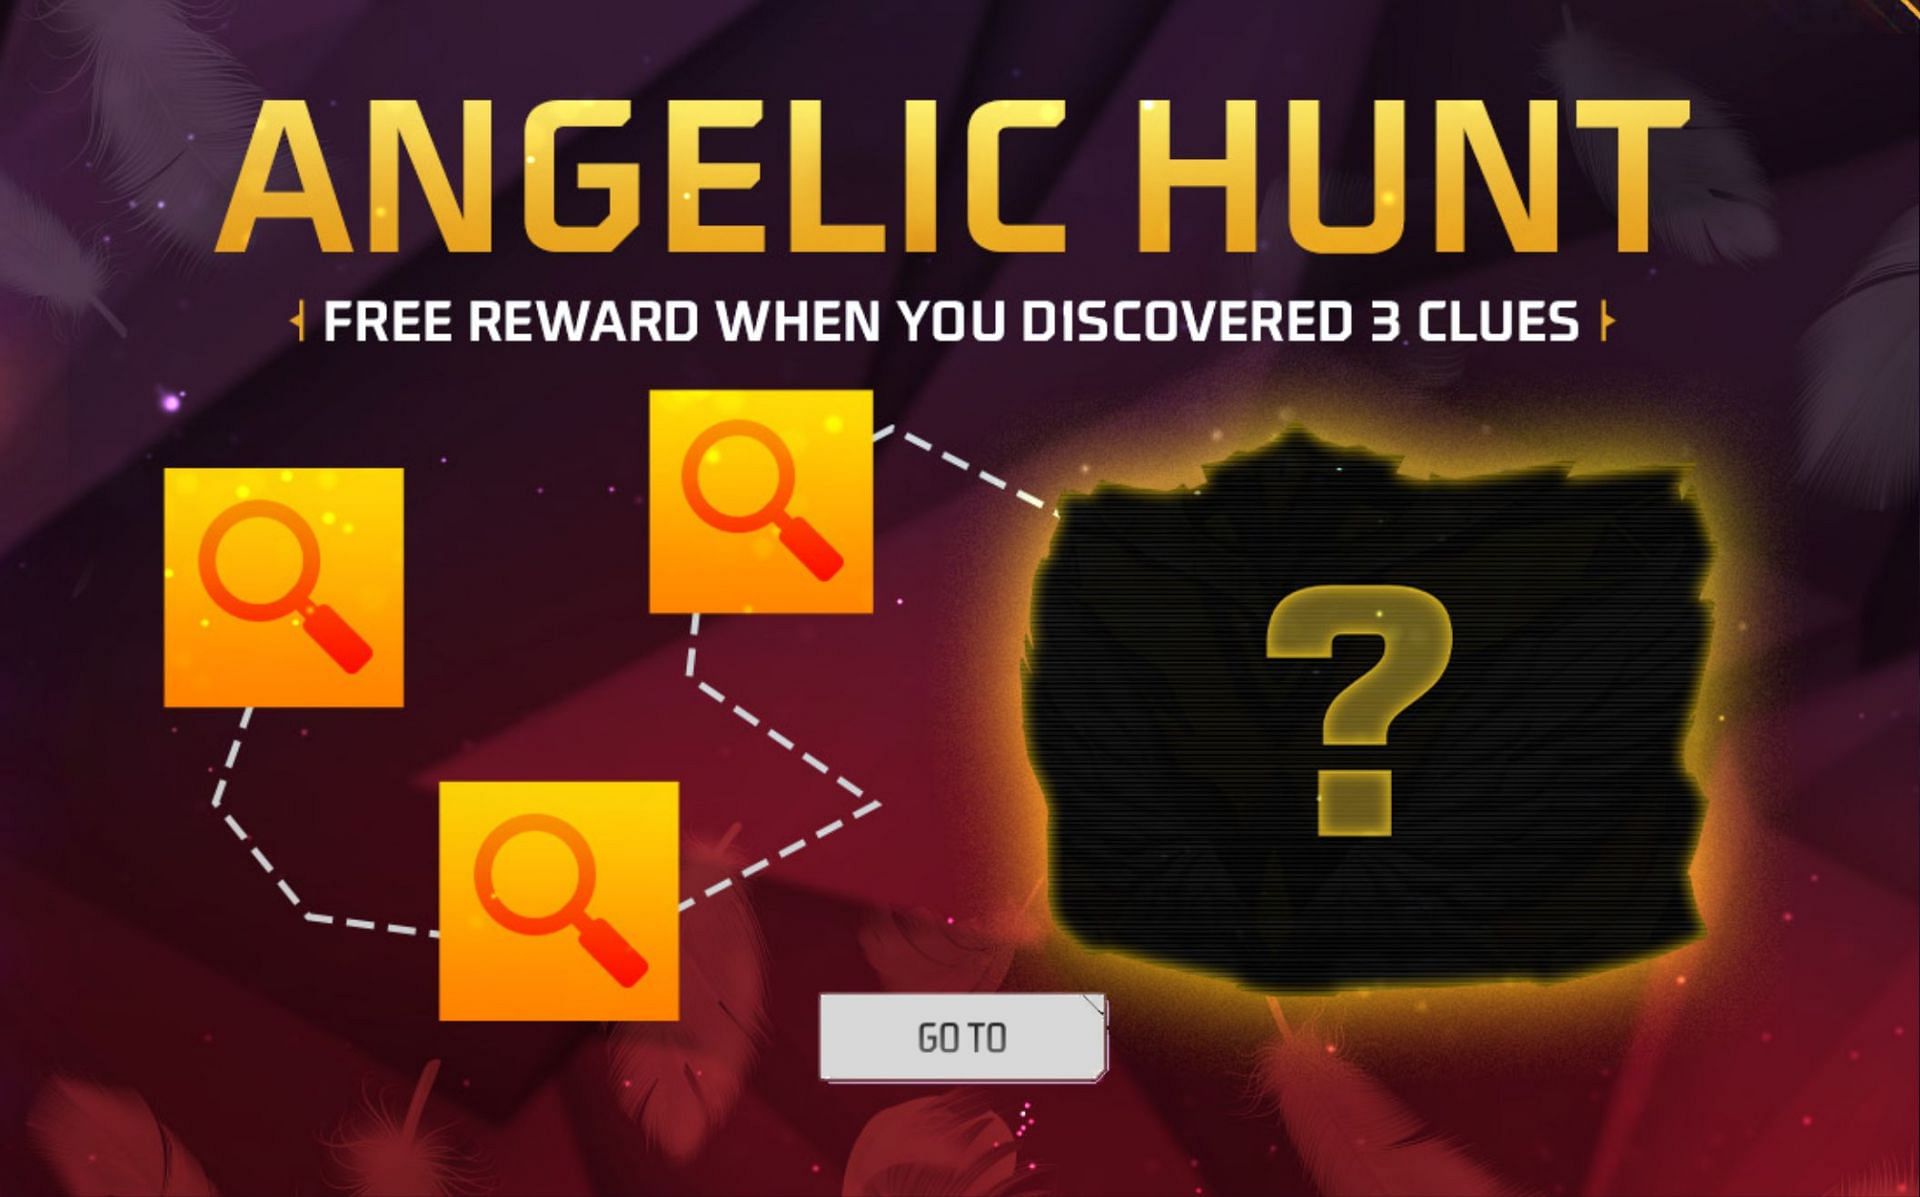 New Angelic Hunt event preview is available in the game (Image via Garena)